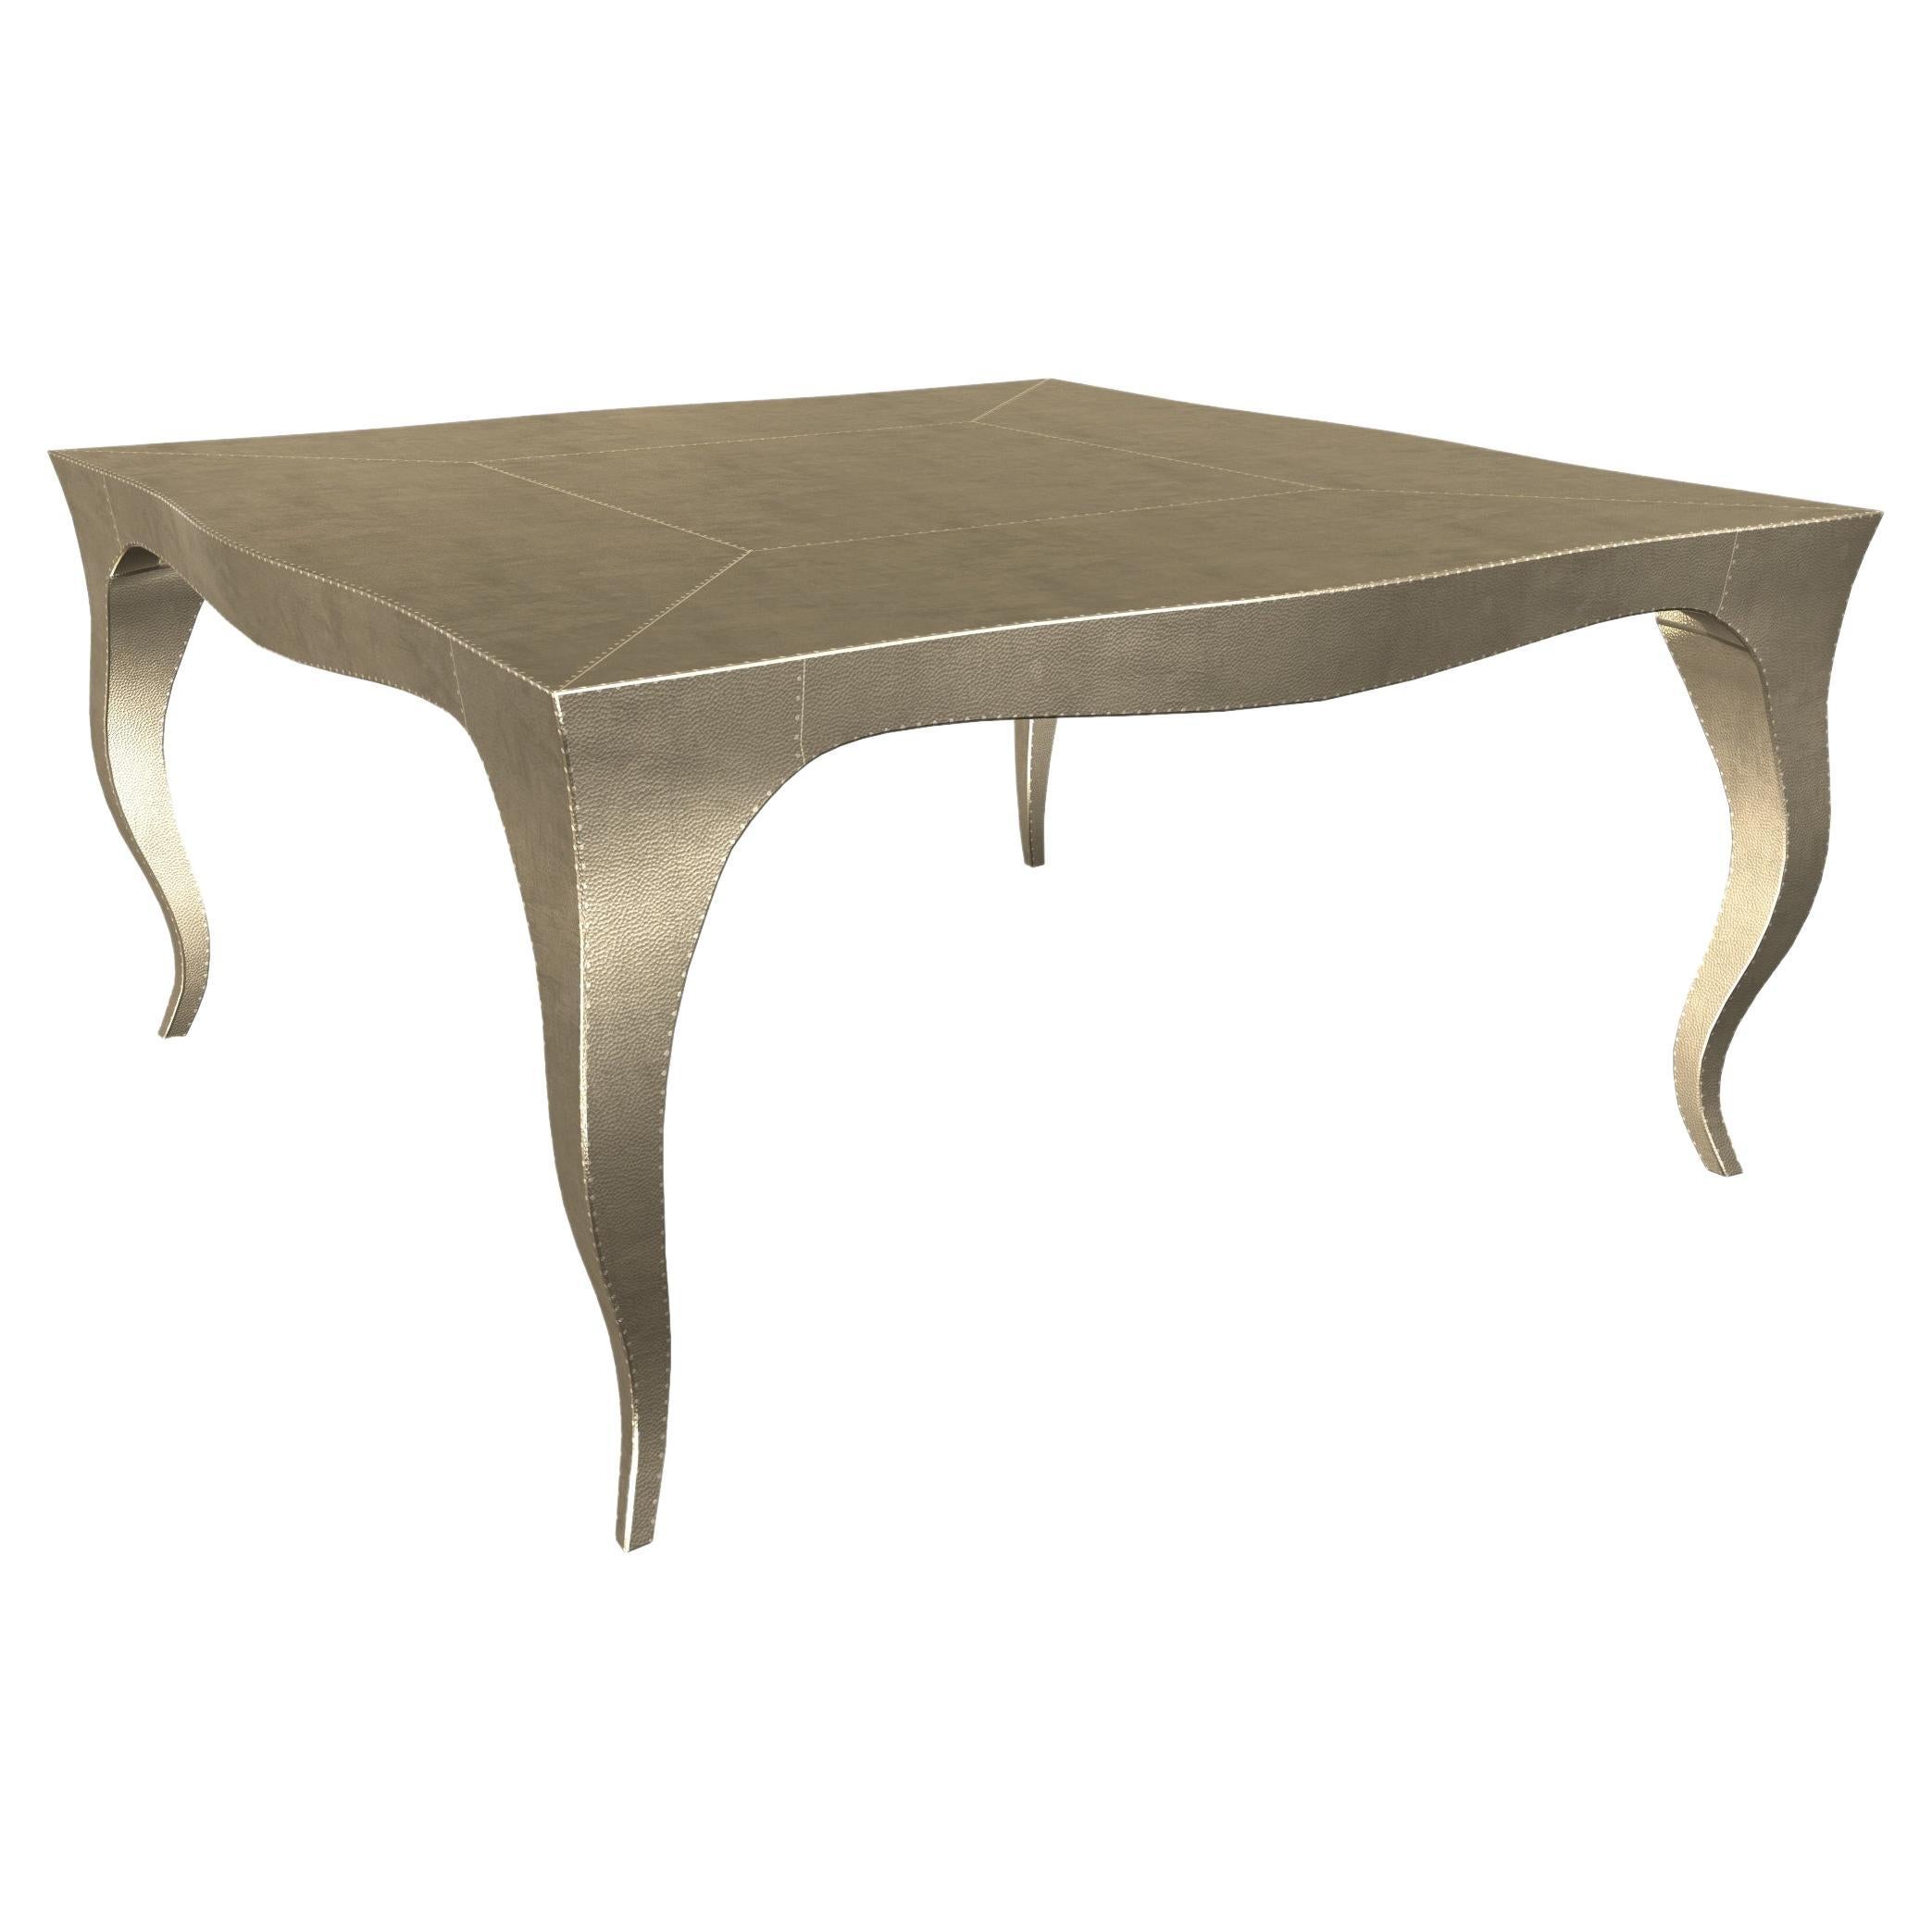 Louise Art Deco Nesting Tables Mid. Hammered Brass 18.5x18.5x10 inch by Paul M. For Sale